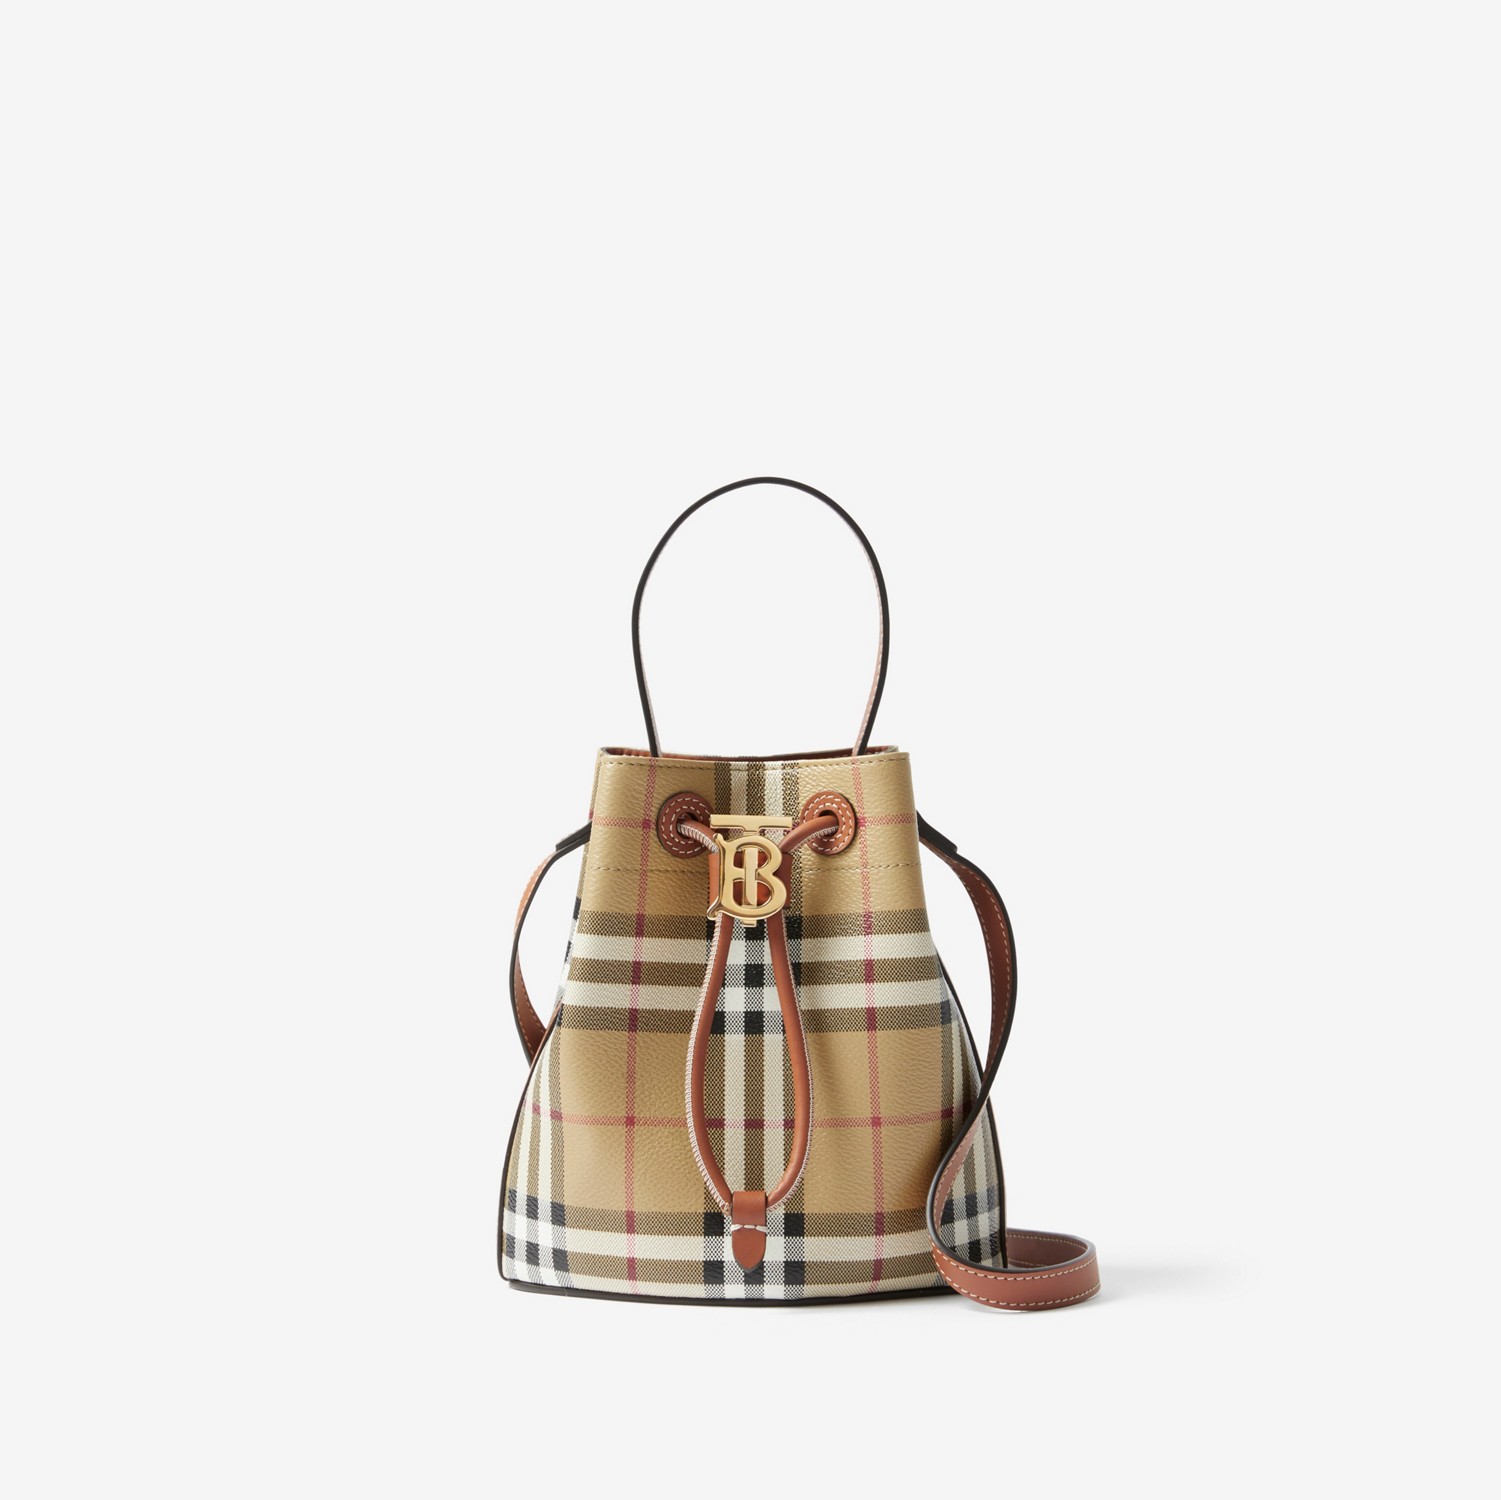 Mini TB Bucket Bag in Archive beige/briar brown - Women | Burberry® Official